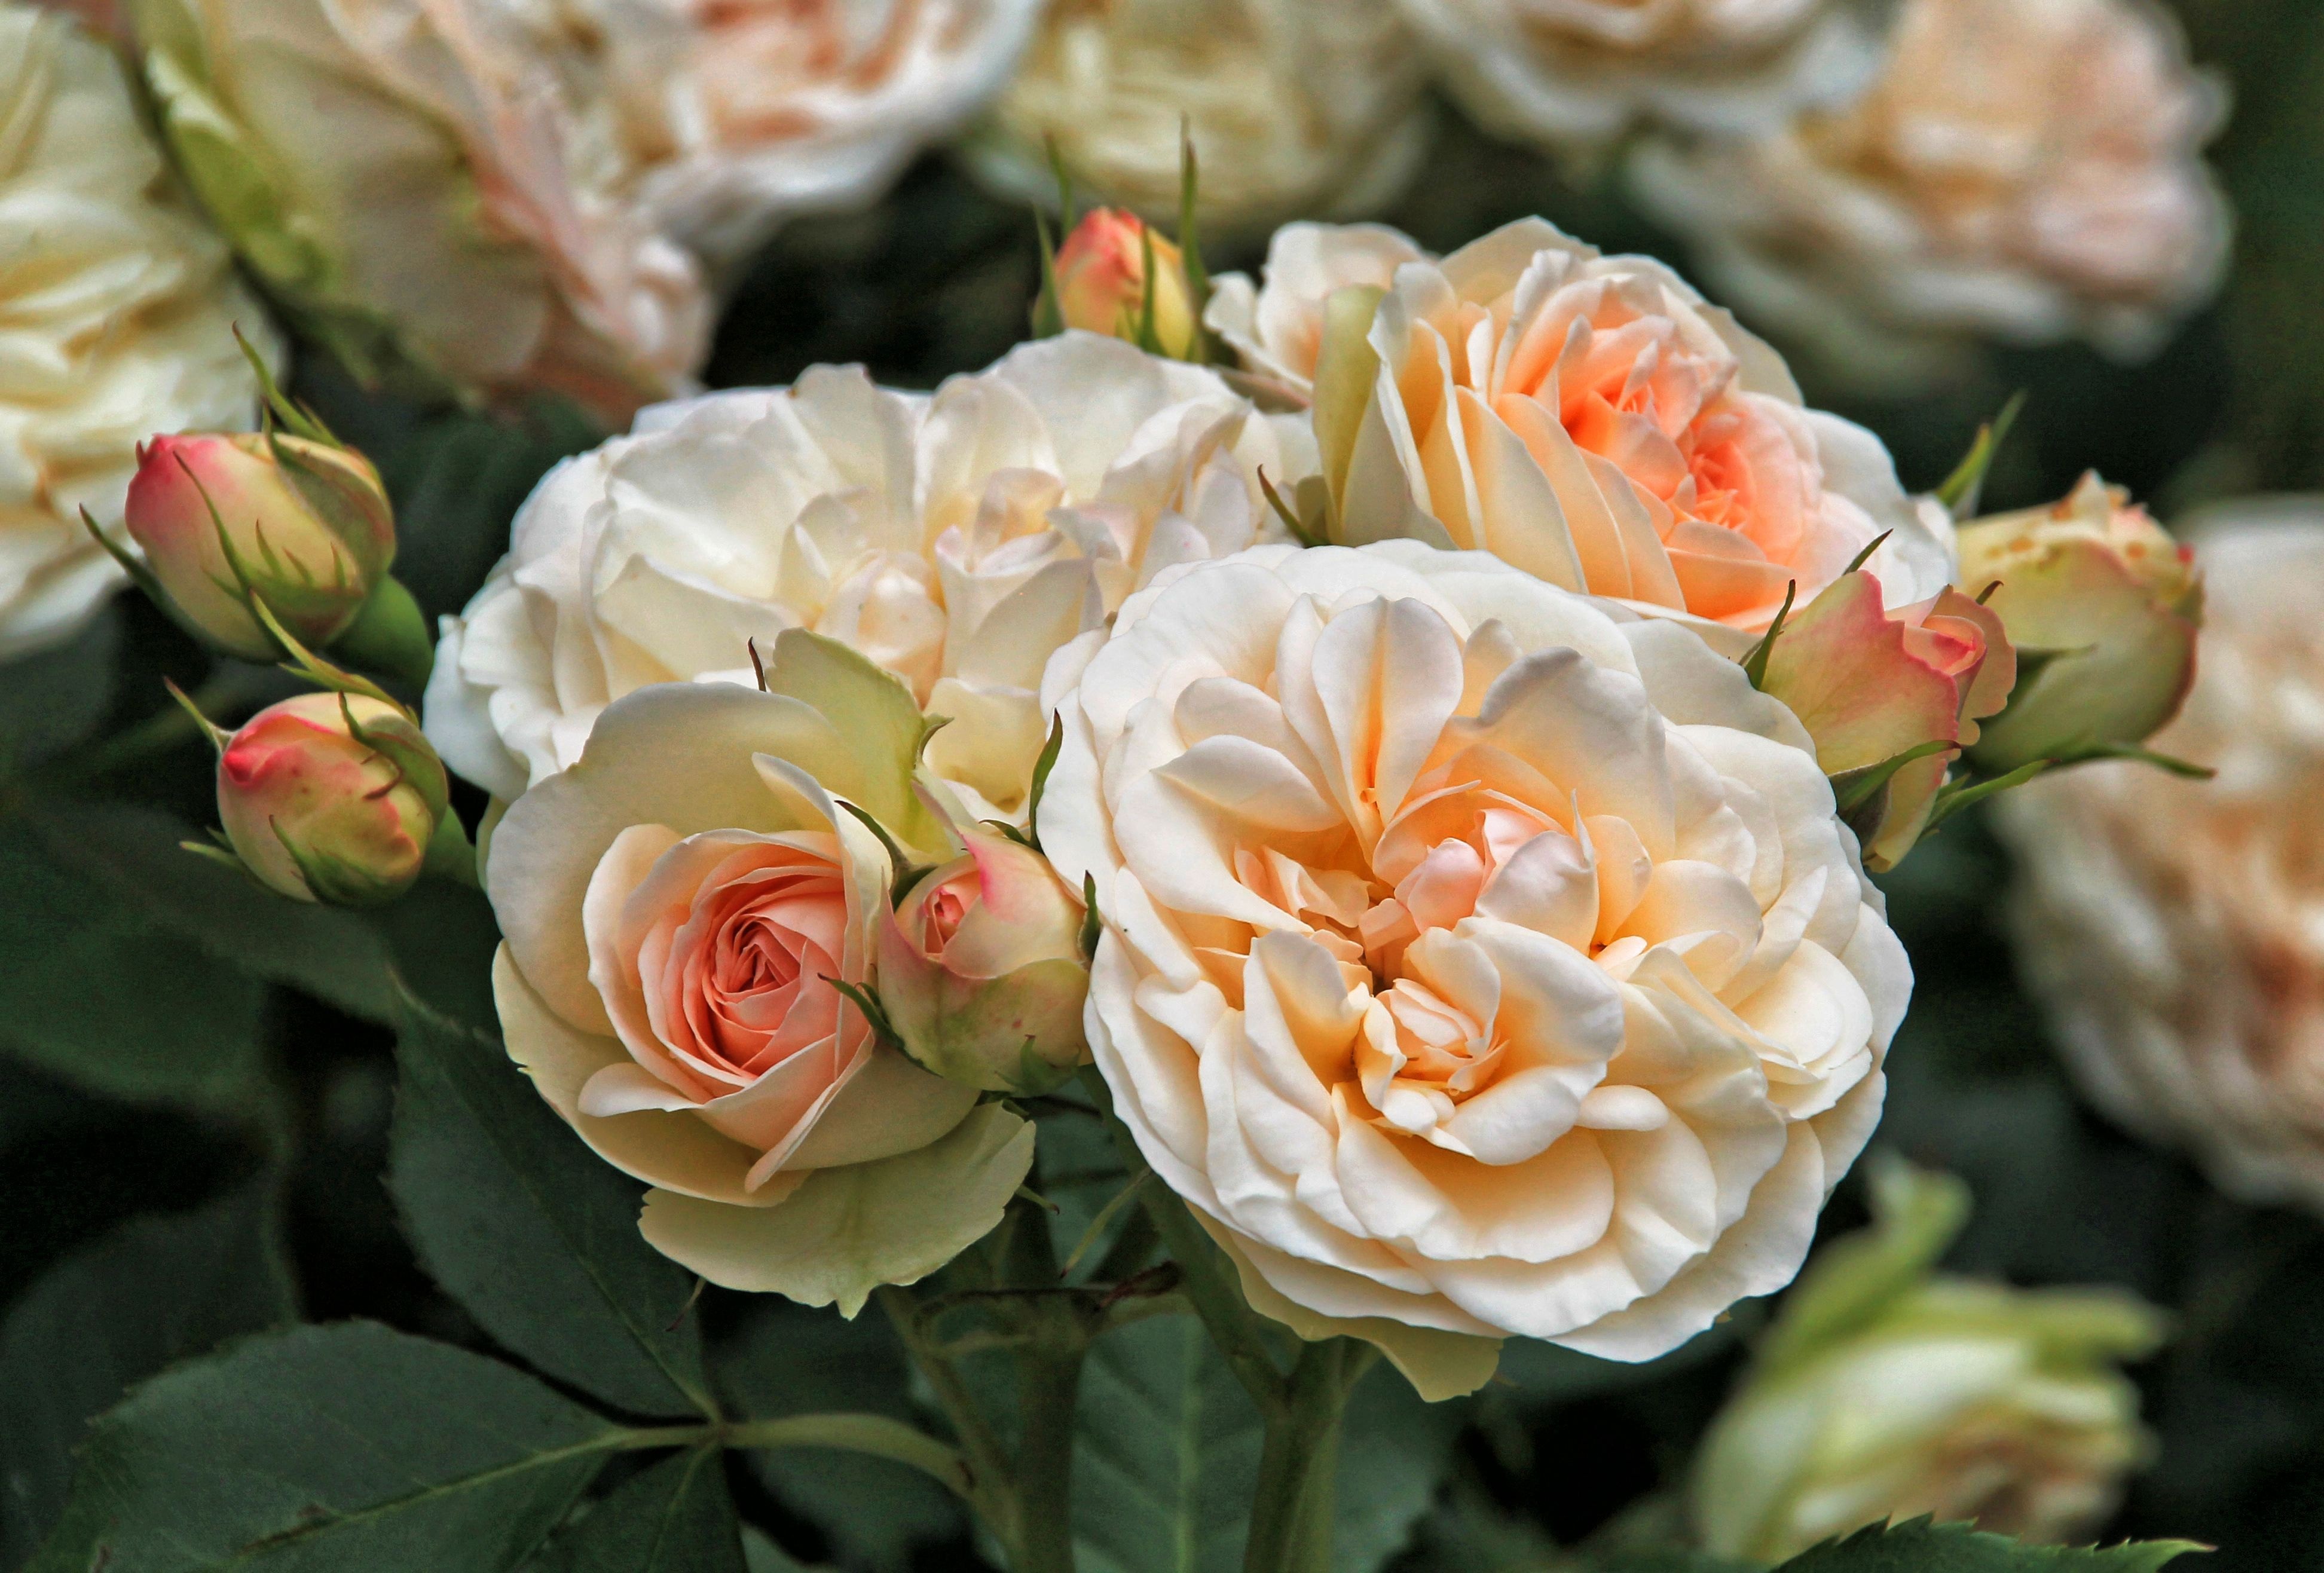 peach roses blooming at daytime in close-up photography